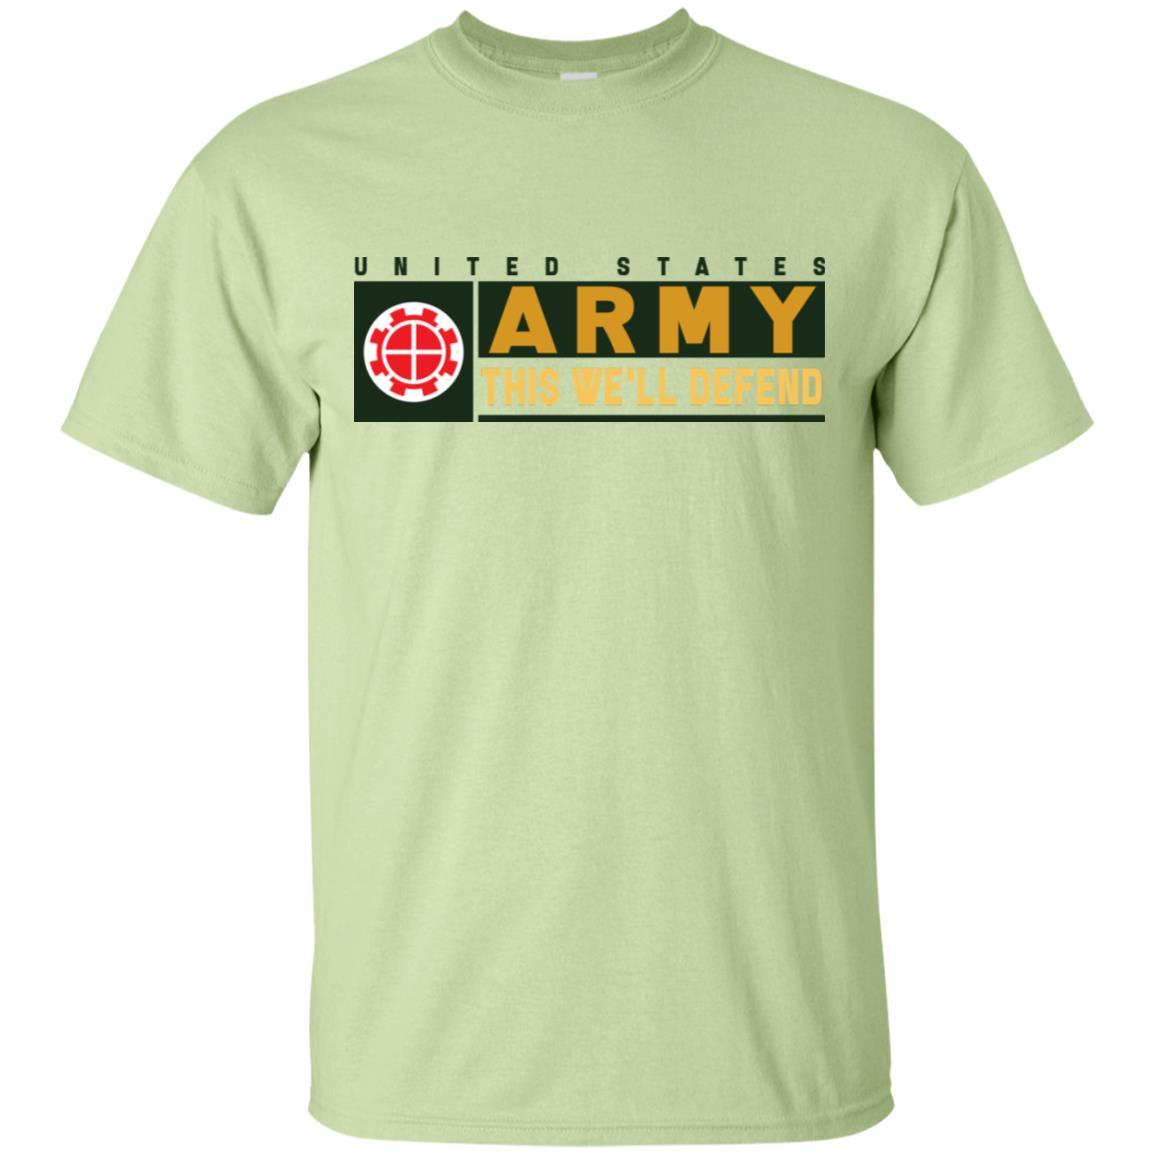 US Army 35TH ENGINEER BRIGADE- This We'll Defend T-Shirt On Front For Men-TShirt-Army-Veterans Nation